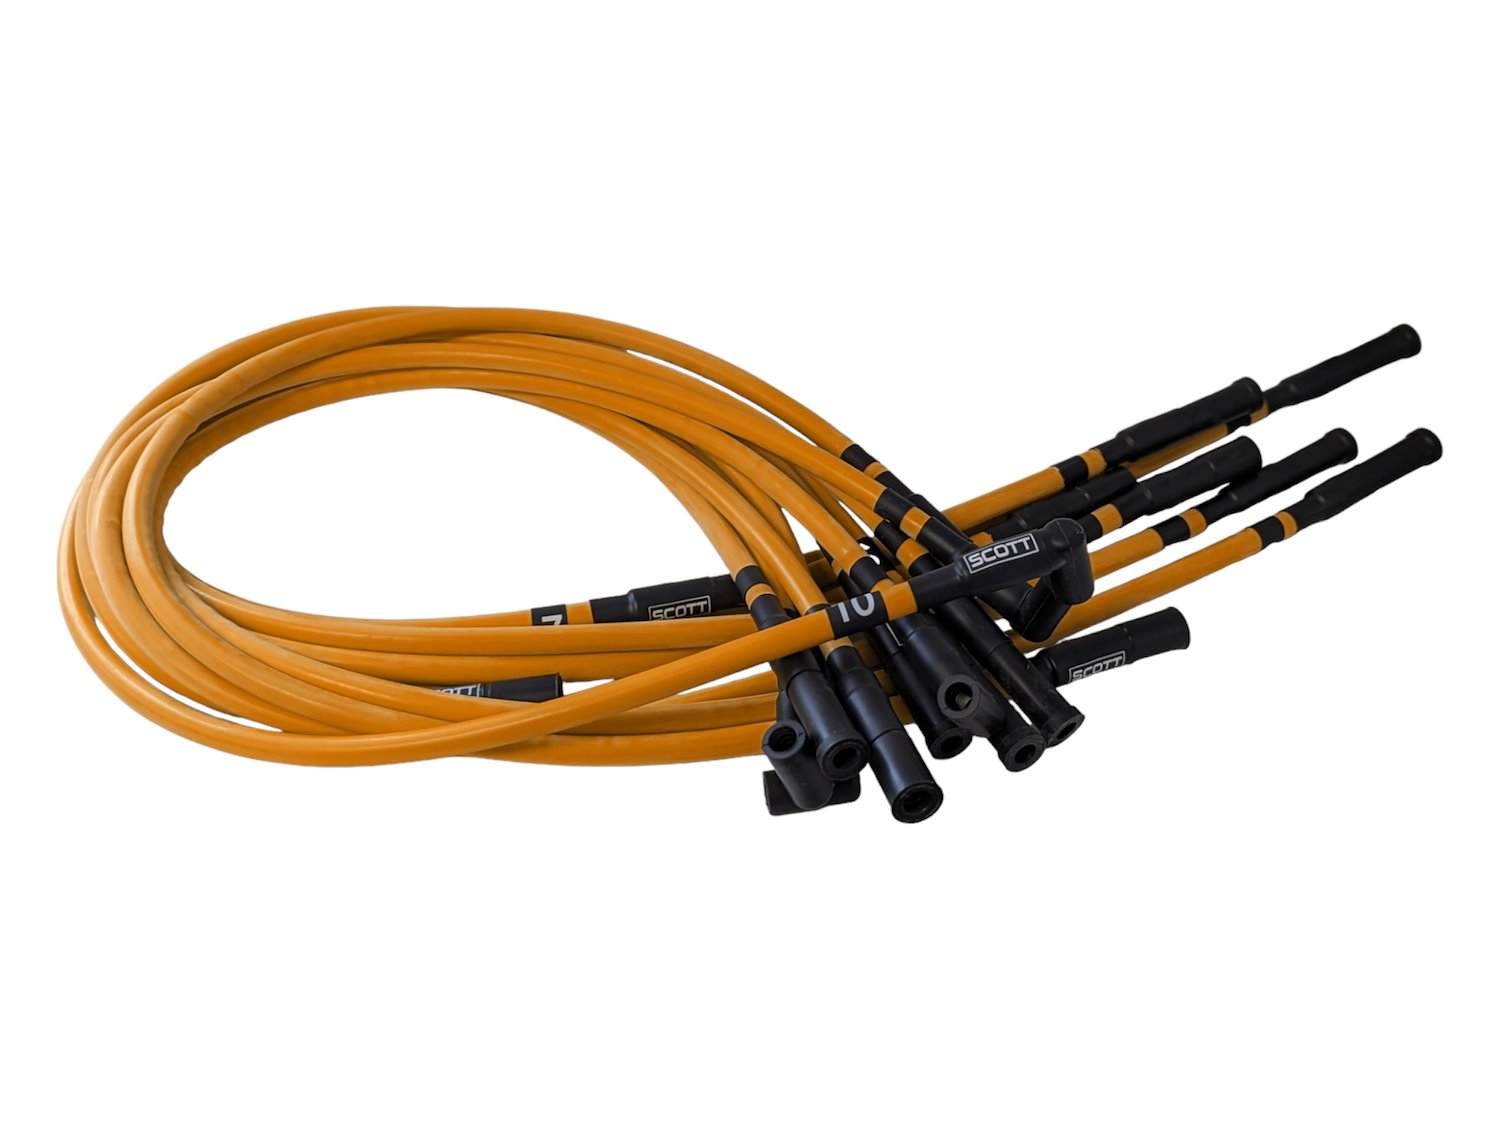 SPW-CH-690-I-5 High-Performance Silicone-Sleeved Spark Plug Wire Set for Dodge Viper (Gen-1) [Orange]